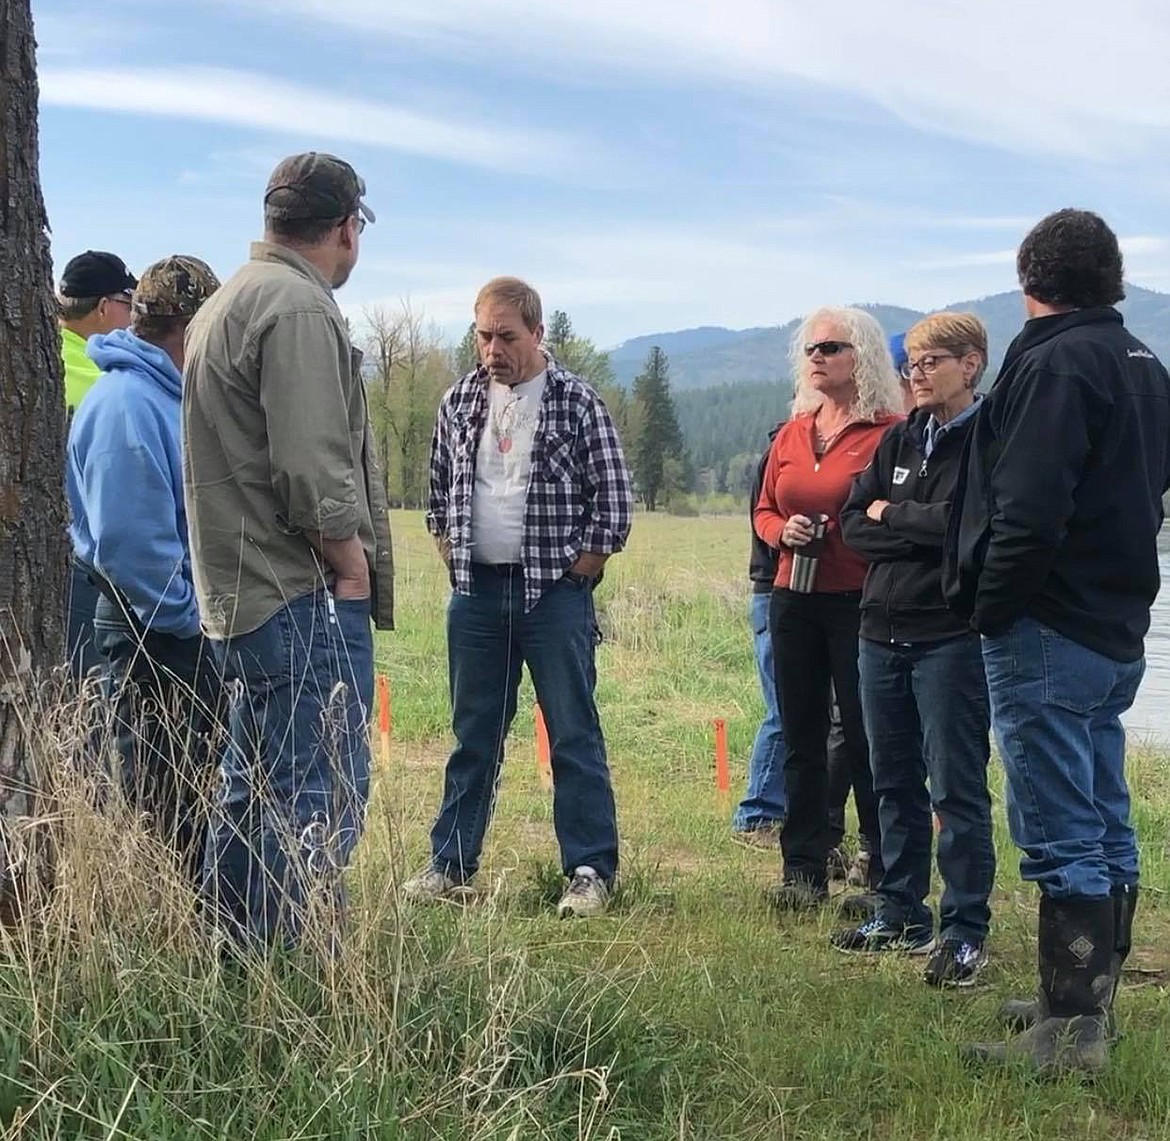 Plains Mayor Danny Rowan, Sanders County Commissioner Carol Brooker and Sanders COunty Emergency Manager Bill Naegeli meet with other officials to discuss the impending emergency along the banks of the Clark Fork River in Plains last week (Erin Jusseaume/Clark Fork Valley Press)